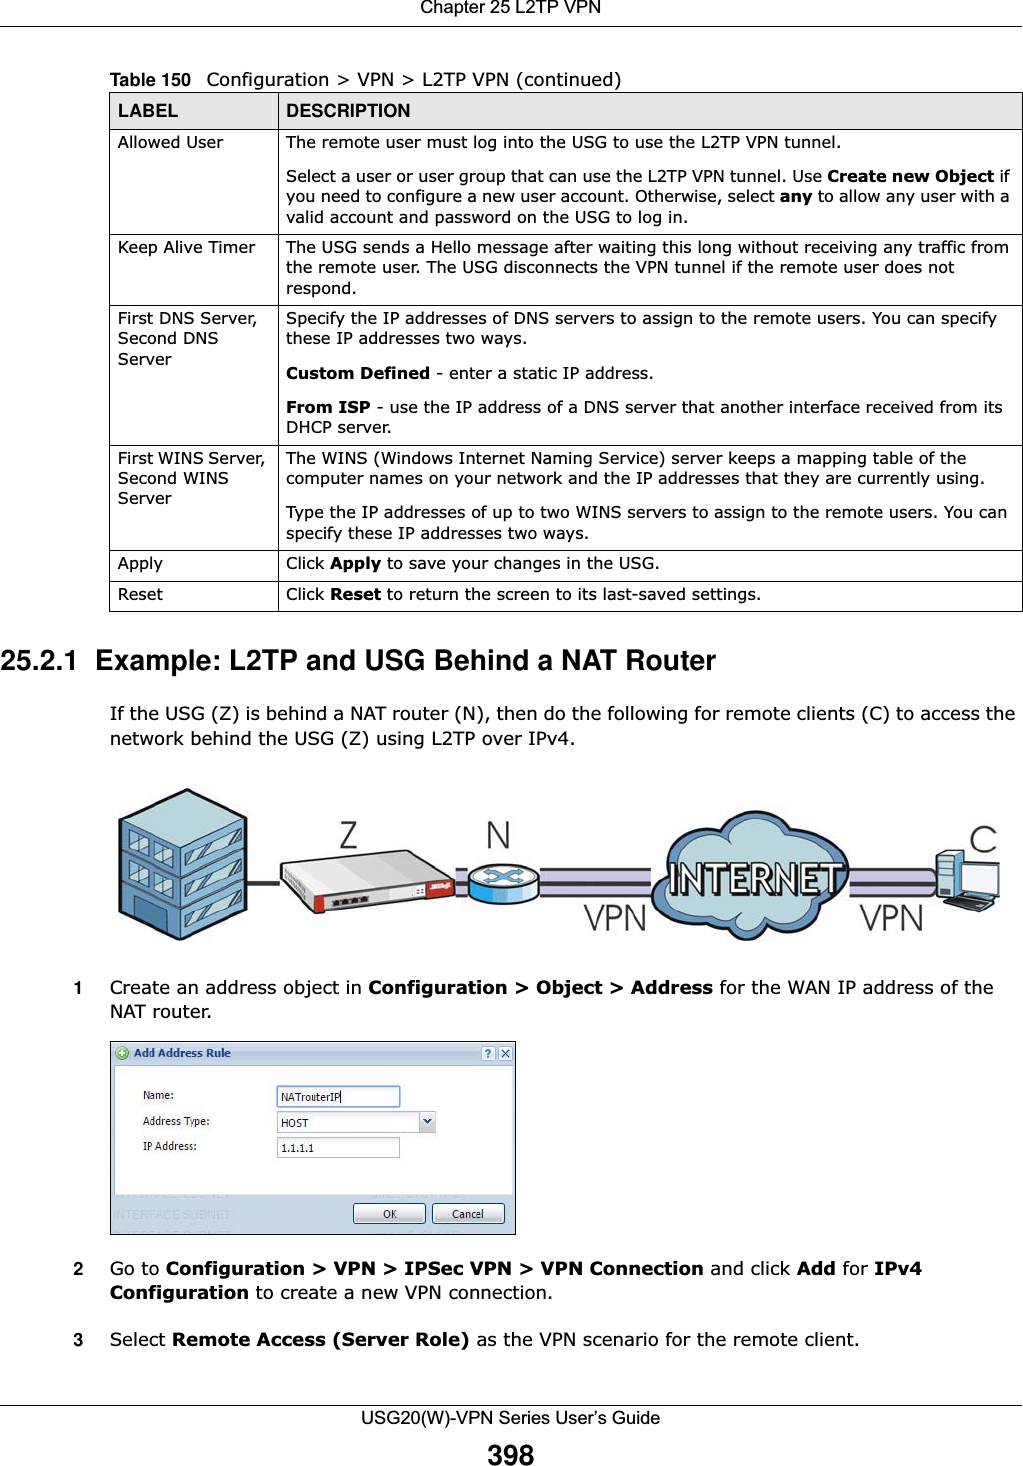 Chapter 25 L2TP VPNUSG20(W)-VPN Series User’s Guide39825.2.1  Example: L2TP and USG Behind a NAT Router If the USG (Z) is behind a NAT router (N), then do the following for remote clients (C) to access the network behind the USG (Z) using L2TP over IPv4.1Create an address object in Configuration &gt; Object &gt; Address for the WAN IP address of the NAT router.2Go to Configuration &gt; VPN &gt; IPSec VPN &gt; VPN Connection and click Add for IPv4Configuration to create a new VPN connection.3Select Remote Access (Server Role) as the VPN scenario for the remote client. Allowed User The remote user must log into the USG to use the L2TP VPN tunnel.Select a user or user group that can use the L2TP VPN tunnel. Use Create new Object if you need to configure a new user account. Otherwise, select any to allow any user with a valid account and password on the USG to log in.Keep Alive Timer The USG sends a Hello message after waiting this long without receiving any traffic from the remote user. The USG disconnects the VPN tunnel if the remote user does not respond.First DNS Server, Second DNS ServerSpecify the IP addresses of DNS servers to assign to the remote users. You can specify these IP addresses two ways.Custom Defined - enter a static IP address.From ISP - use the IP address of a DNS server that another interface received from its DHCP server.First WINS Server, Second WINS Server The WINS (Windows Internet Naming Service) server keeps a mapping table of the computer names on your network and the IP addresses that they are currently using.  Type the IP addresses of up to two WINS servers to assign to the remote users. You can specify these IP addresses two ways.Apply Click Apply to save your changes in the USG.Reset Click Reset to return the screen to its last-saved settings. Table 150   Configuration &gt; VPN &gt; L2TP VPN (continued)LABEL DESCRIPTION